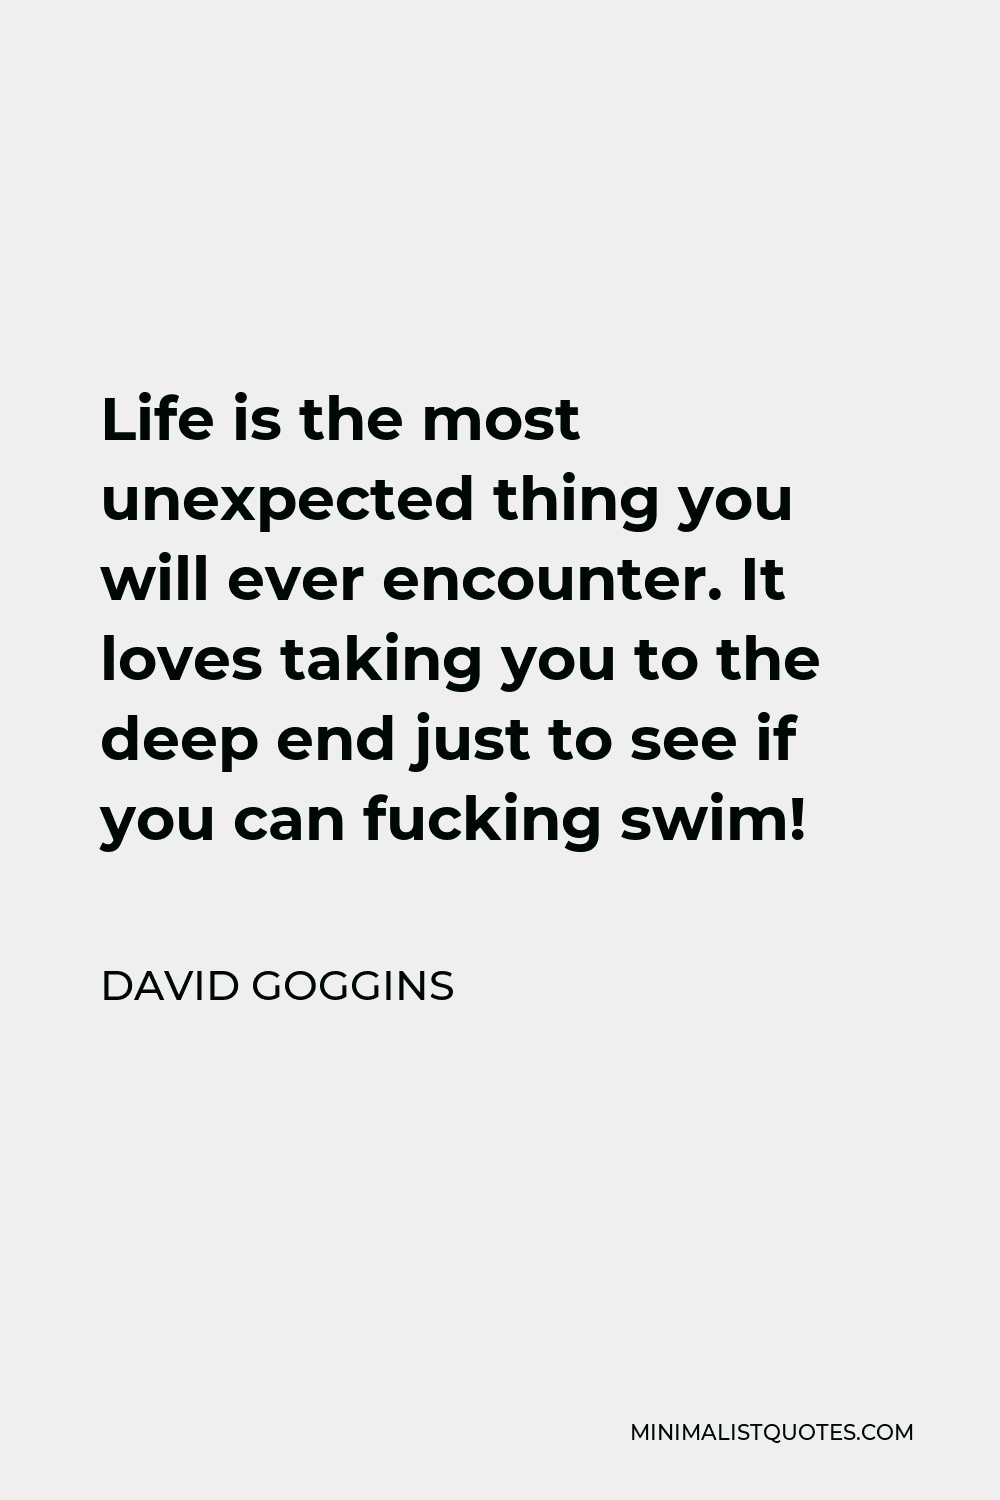 David Goggins Quote - Life is the most unexpected thing you will ever encounter. It loves taking you to the deep end just to see if you can fucking swim!